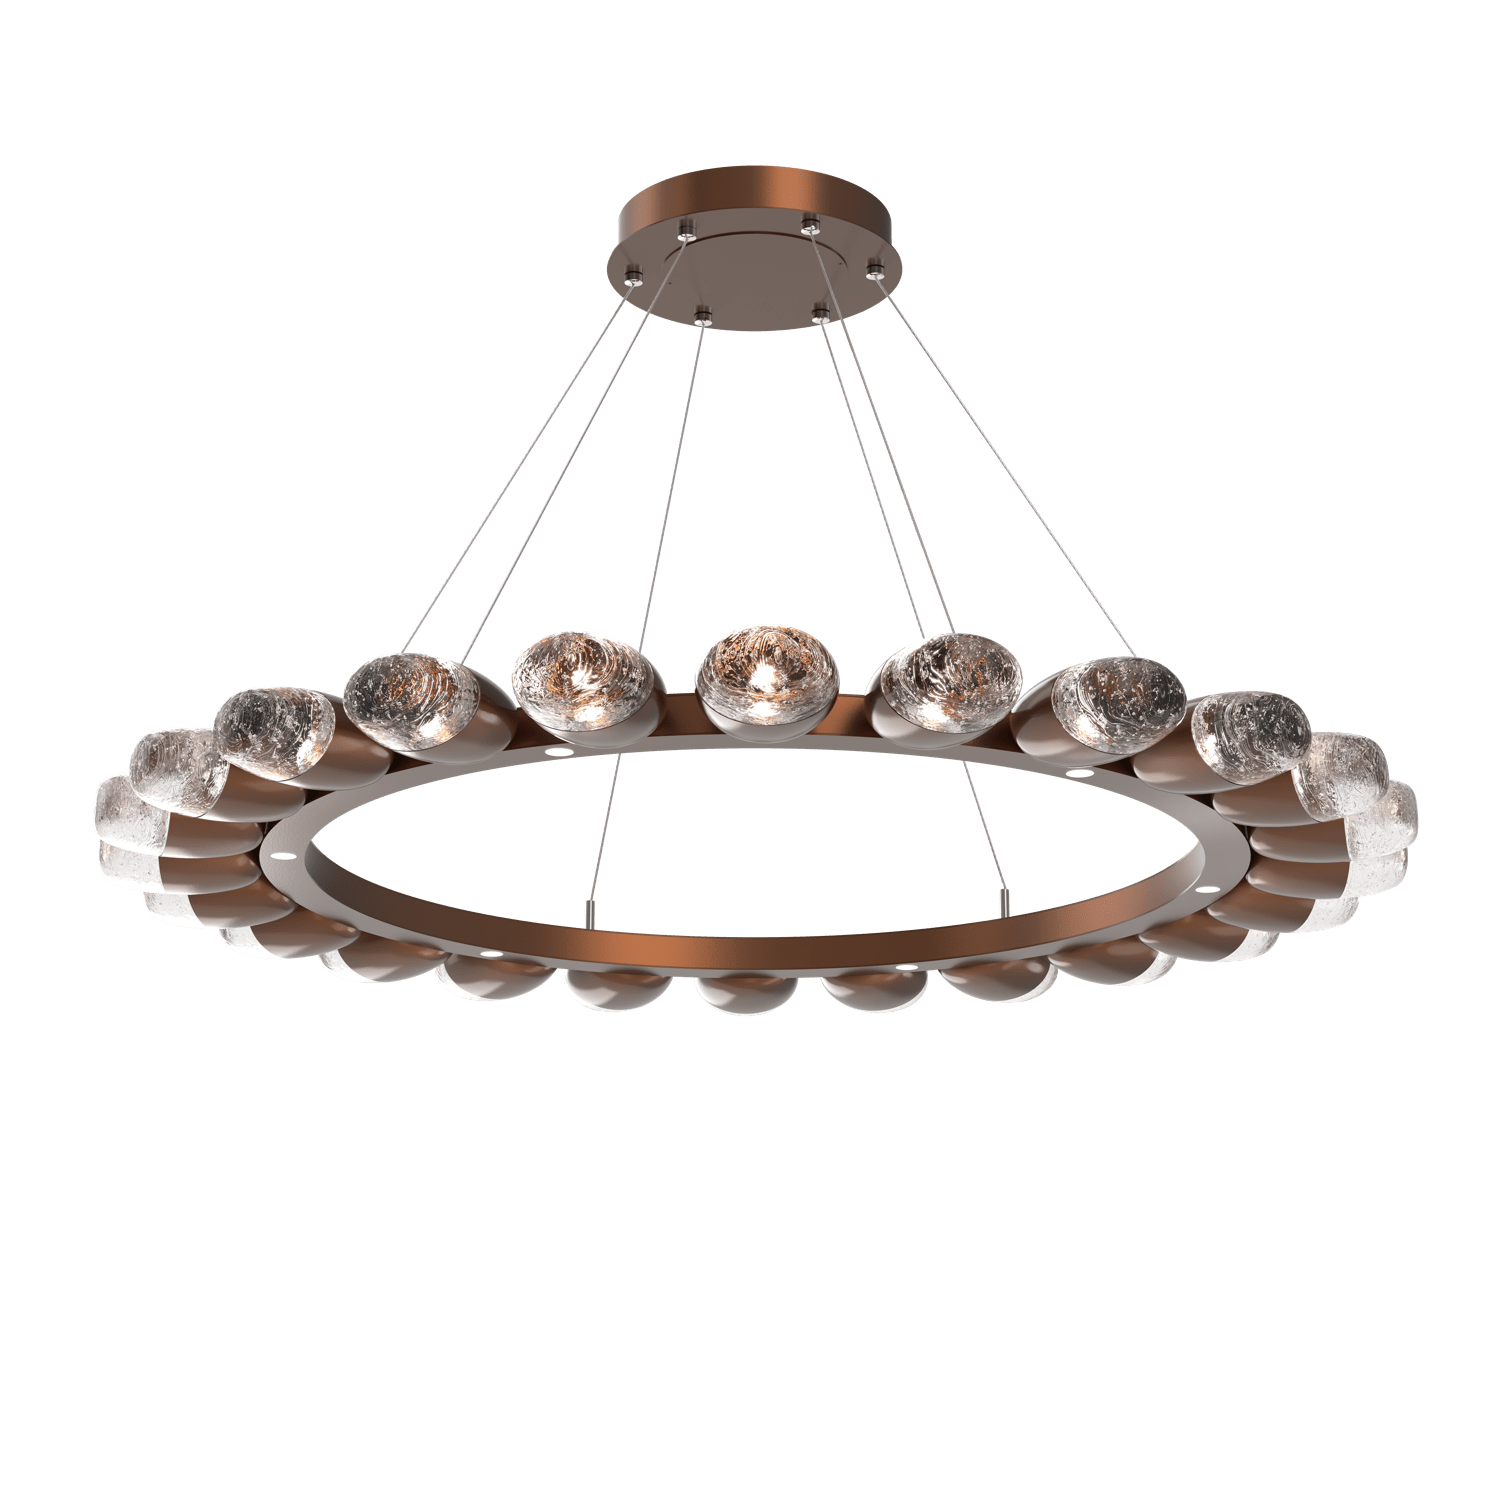 CHB0079-48-BB-Hammerton-Studio-Pebble-48-inch-radial-ring-chandelier-with-burnished-bronze-finish-and-clear-cast-glass-shades-and-LED-lamping